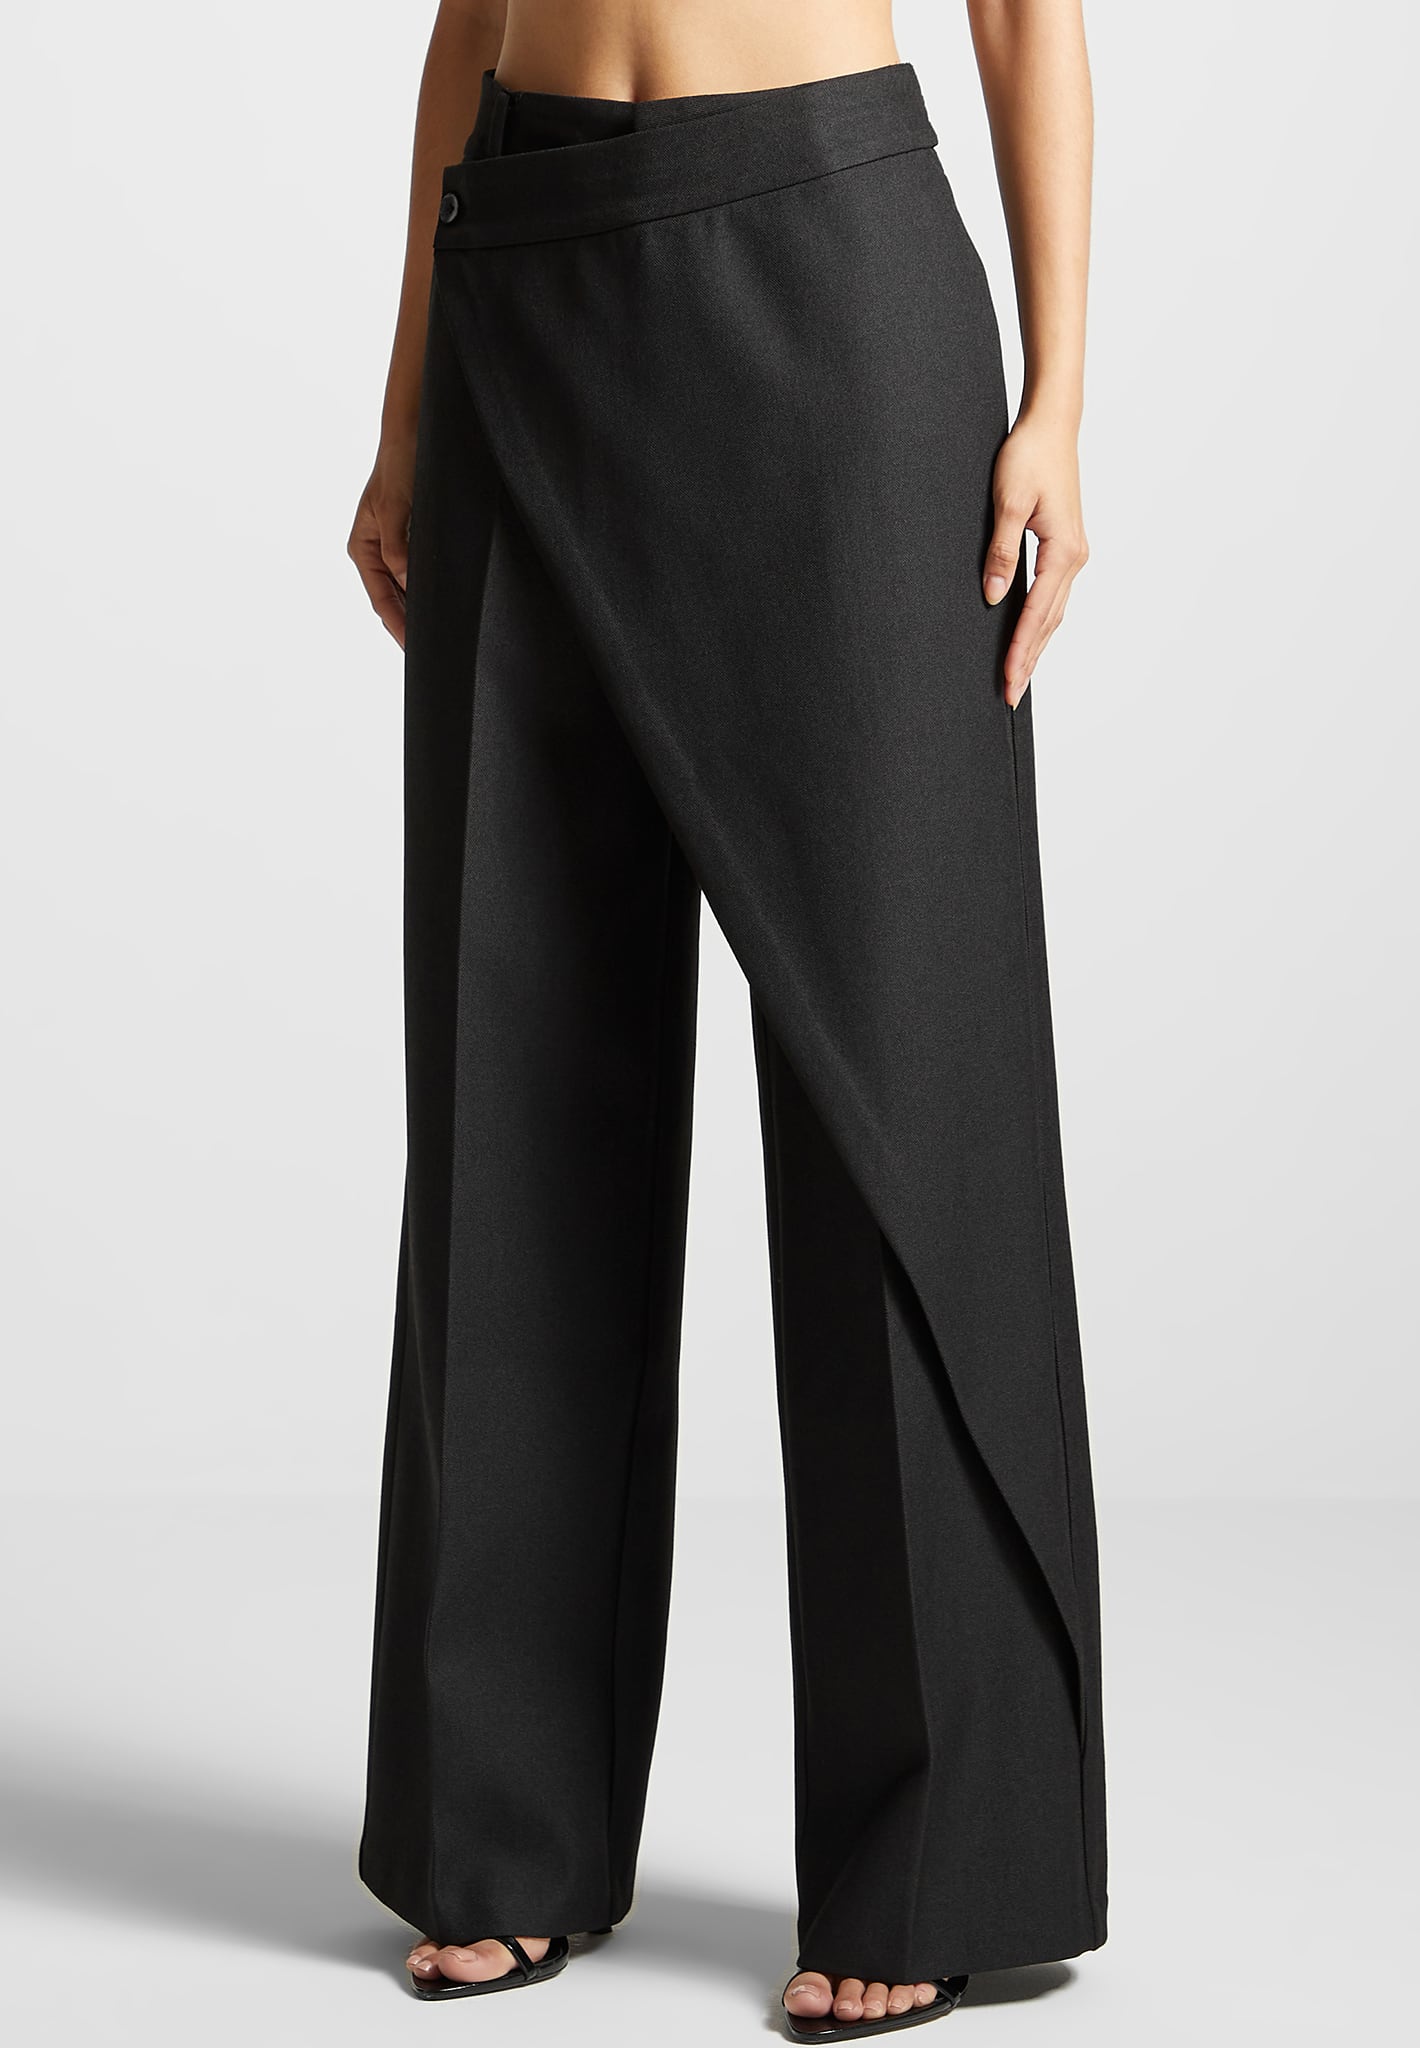 Skinny Double Waistband Tailored Trouser